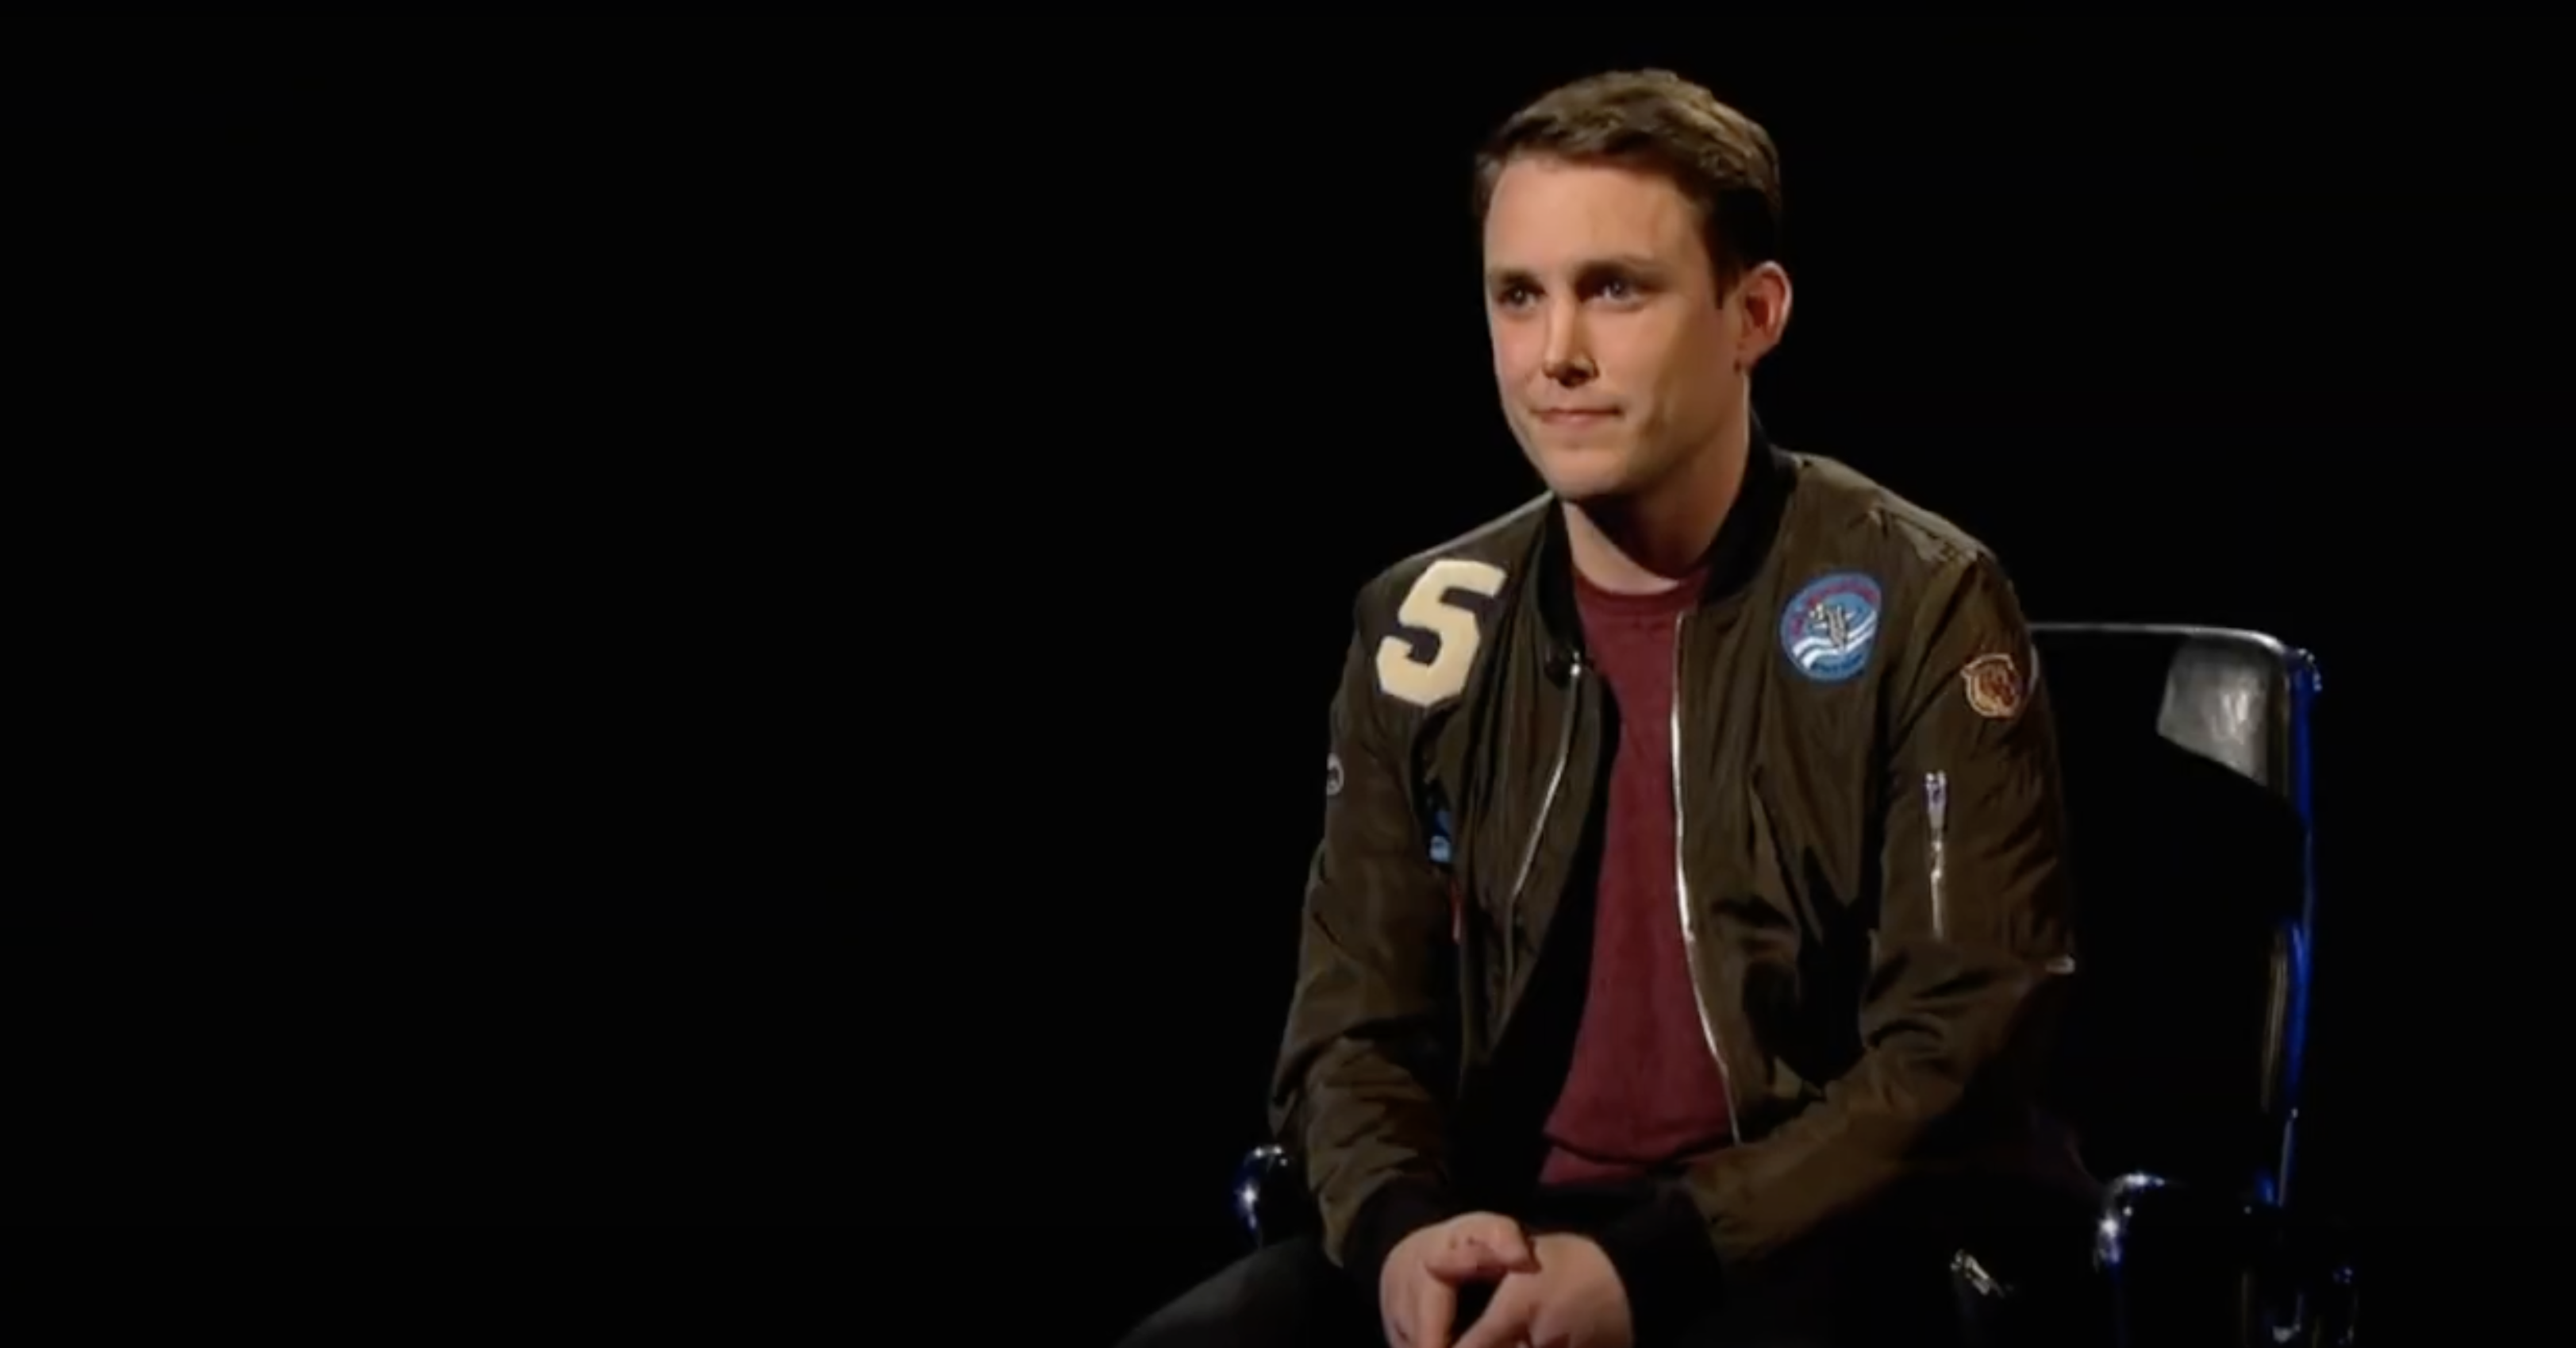 Watch Chris answer questions about Scott for Mastermind